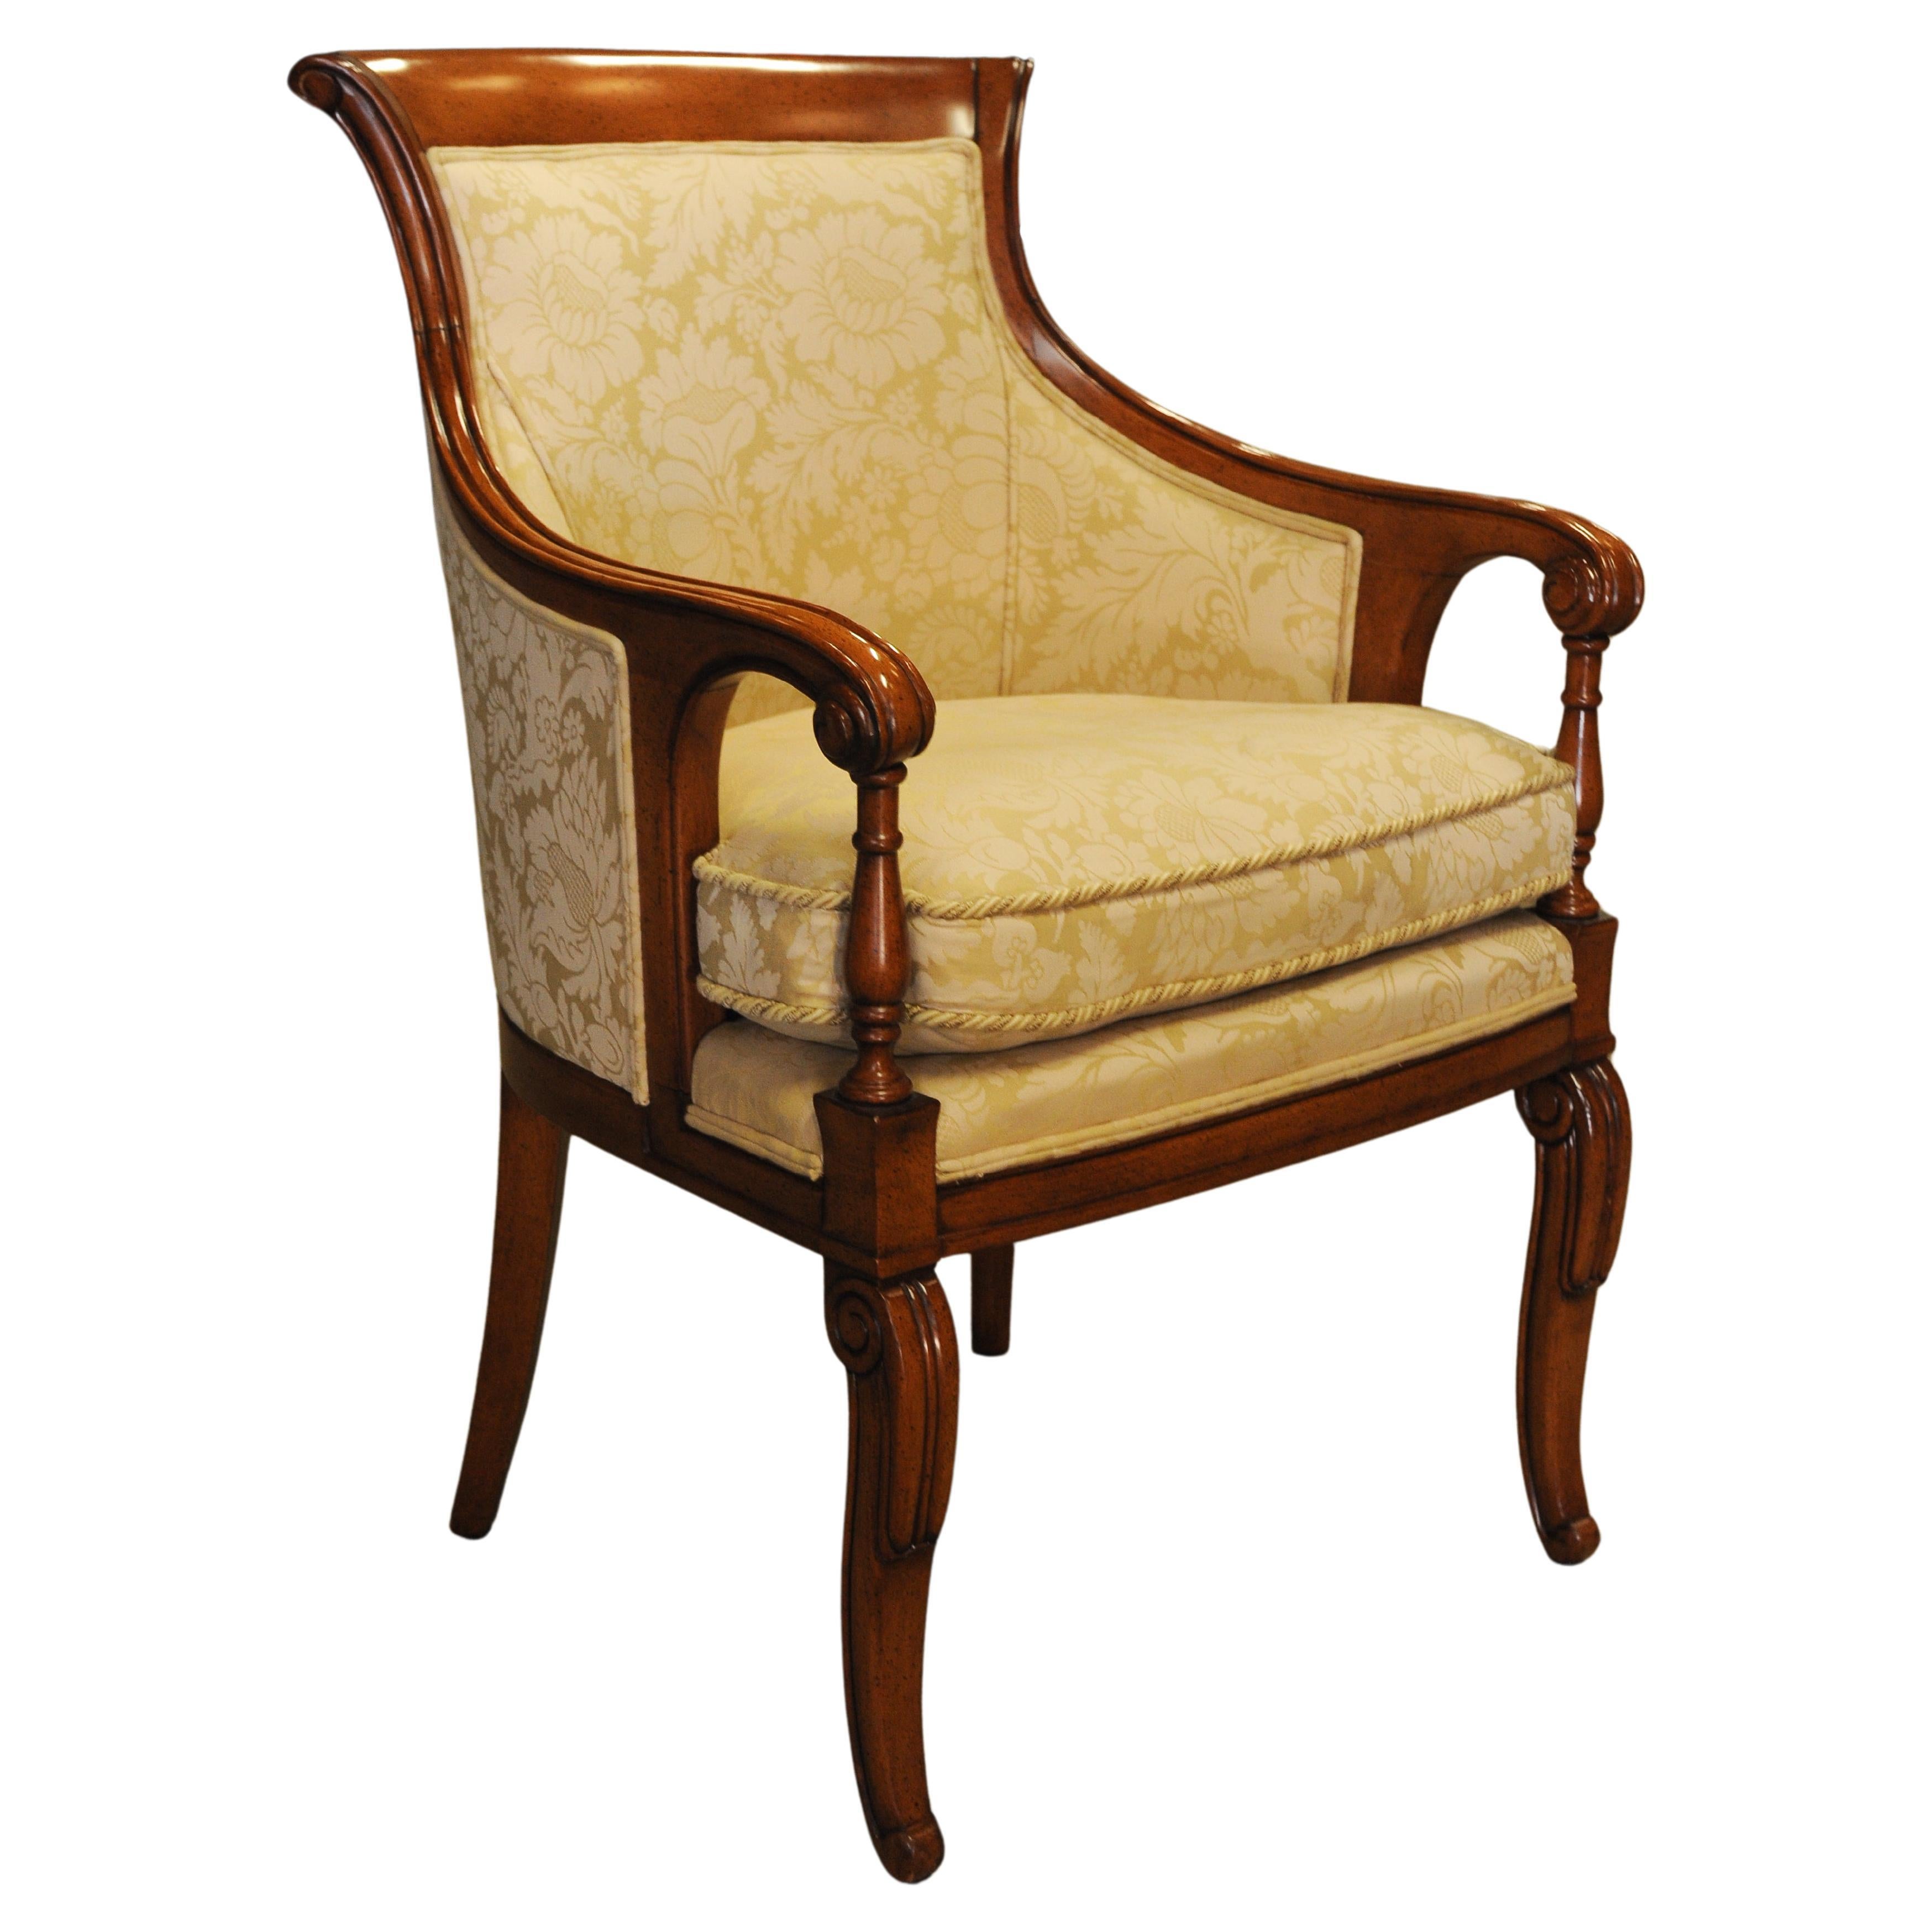 Elegant Pair of William IV Design Bergere Armchairs With Cream Damask Upholstery For Sale 3